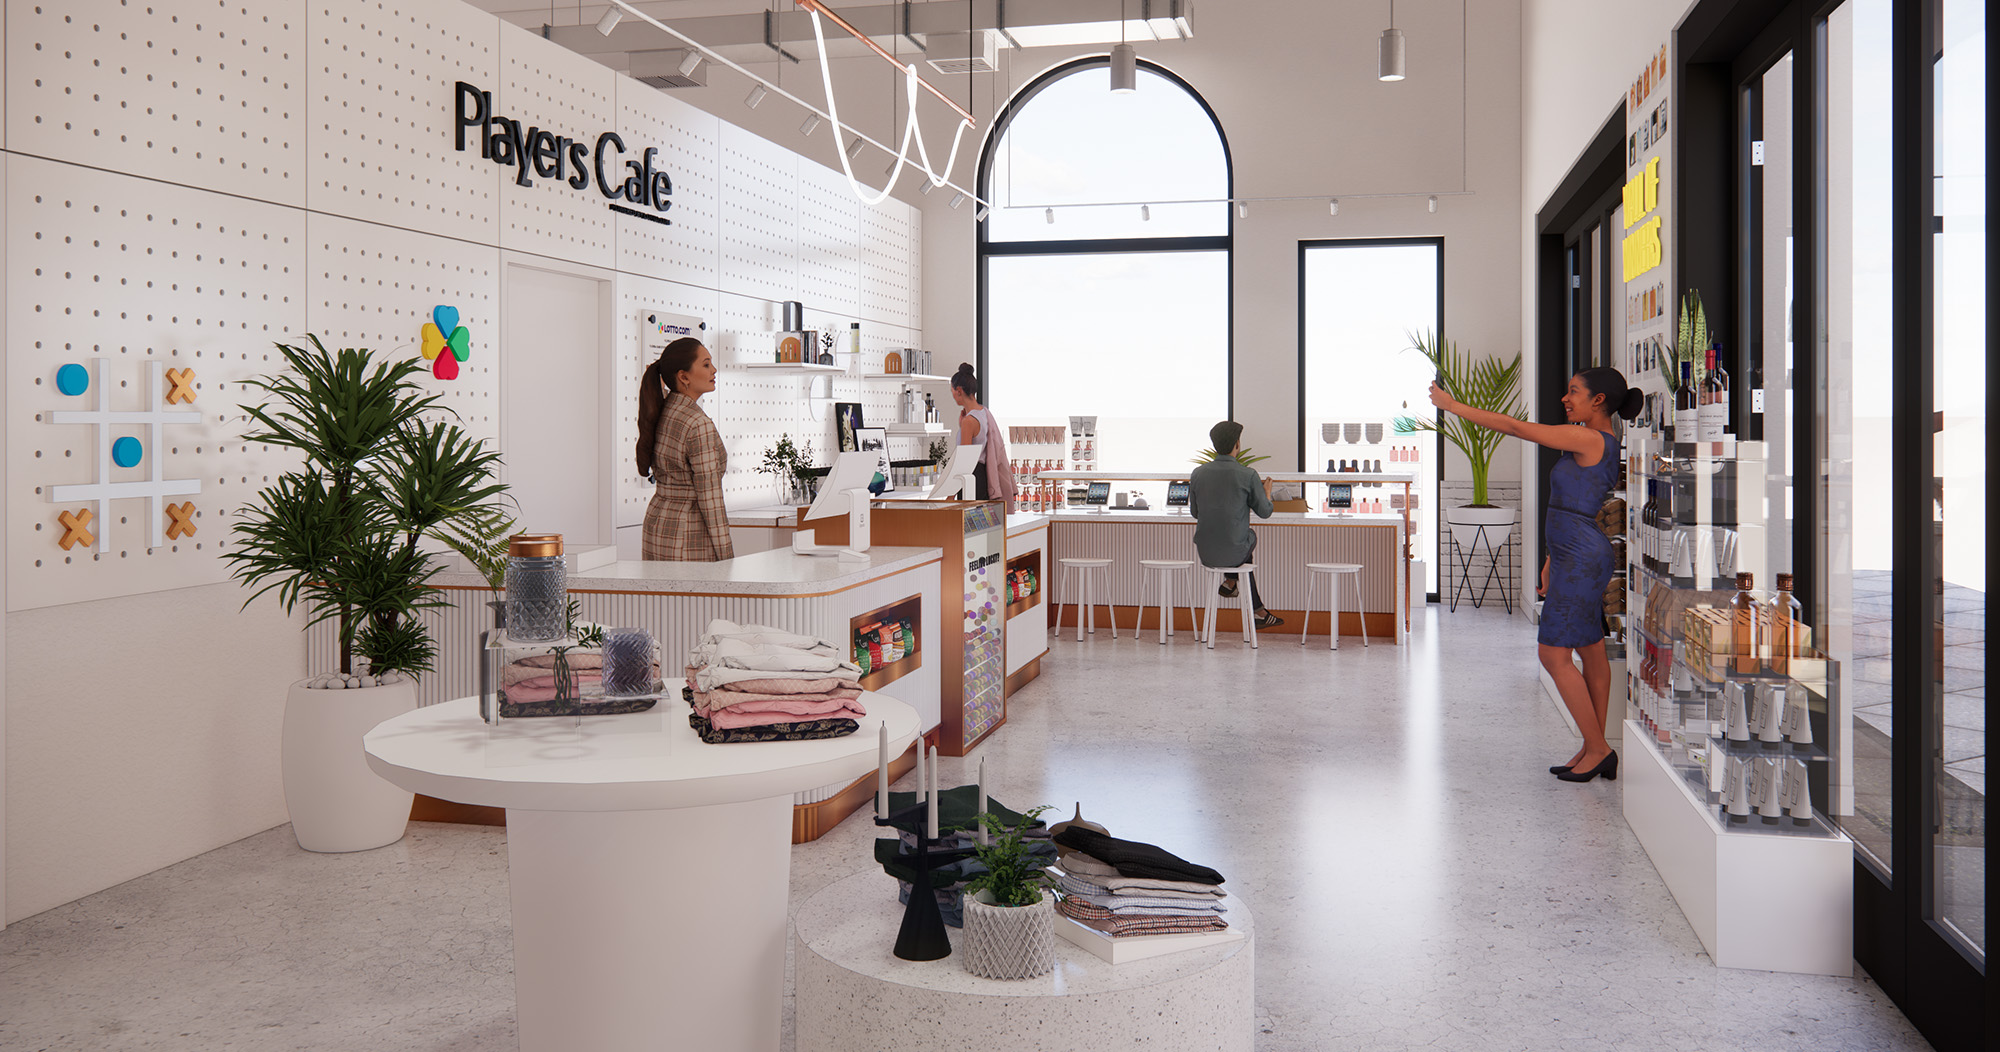 Players Café USA Debuts Experiential Convenience Store